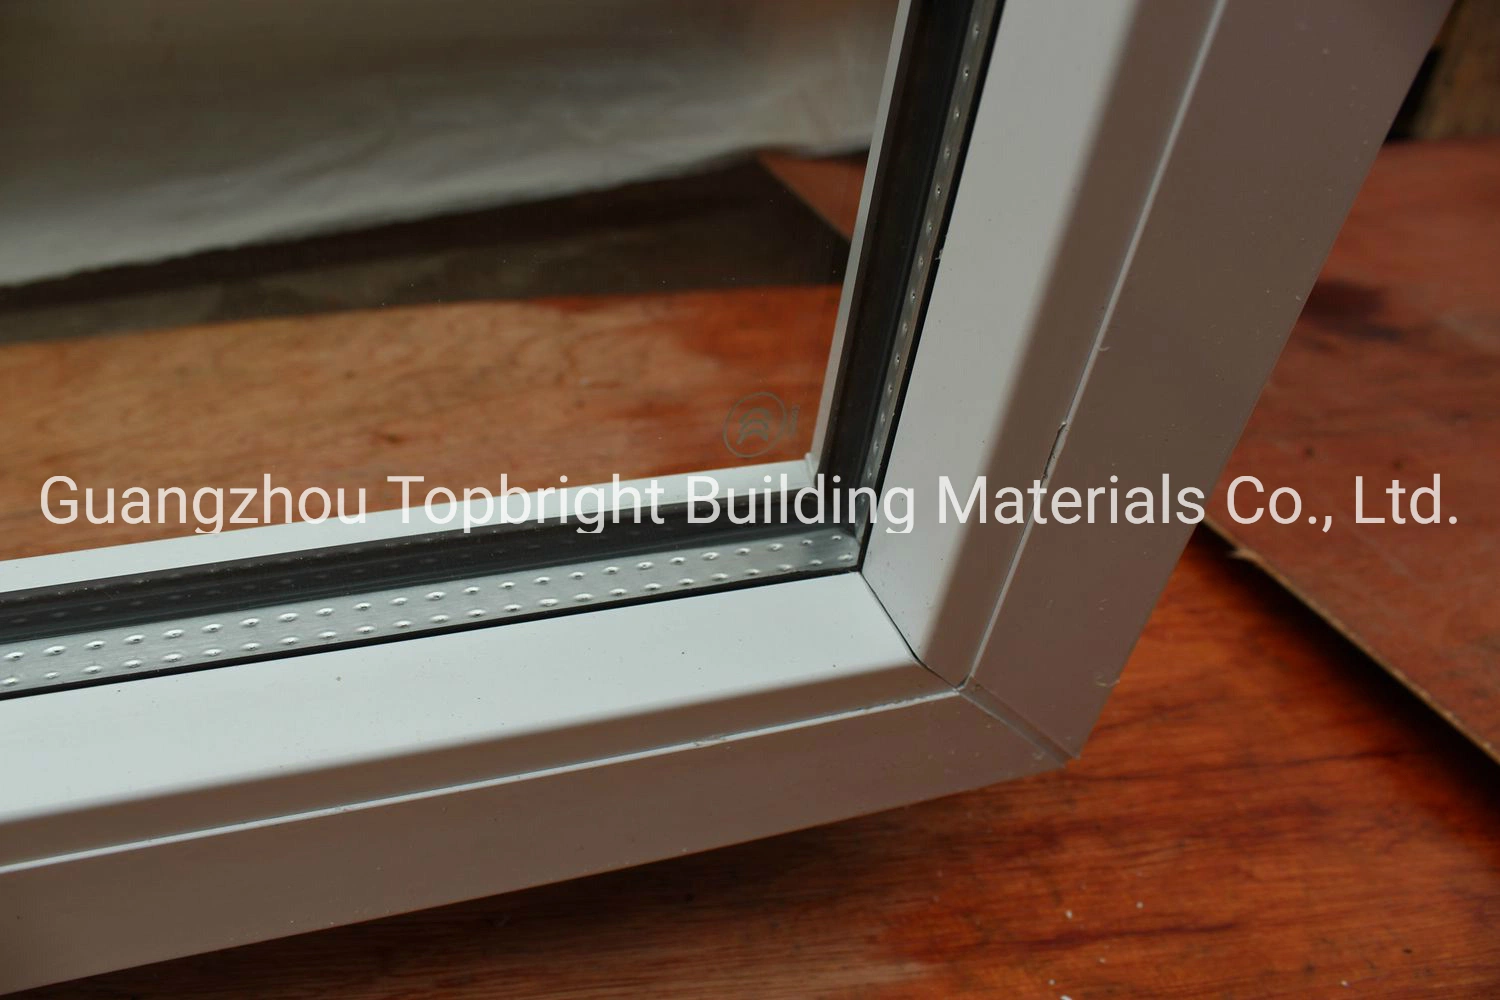 PVC/Upv Vinyl Tophung Window with Energy Saving with Tempered Glass